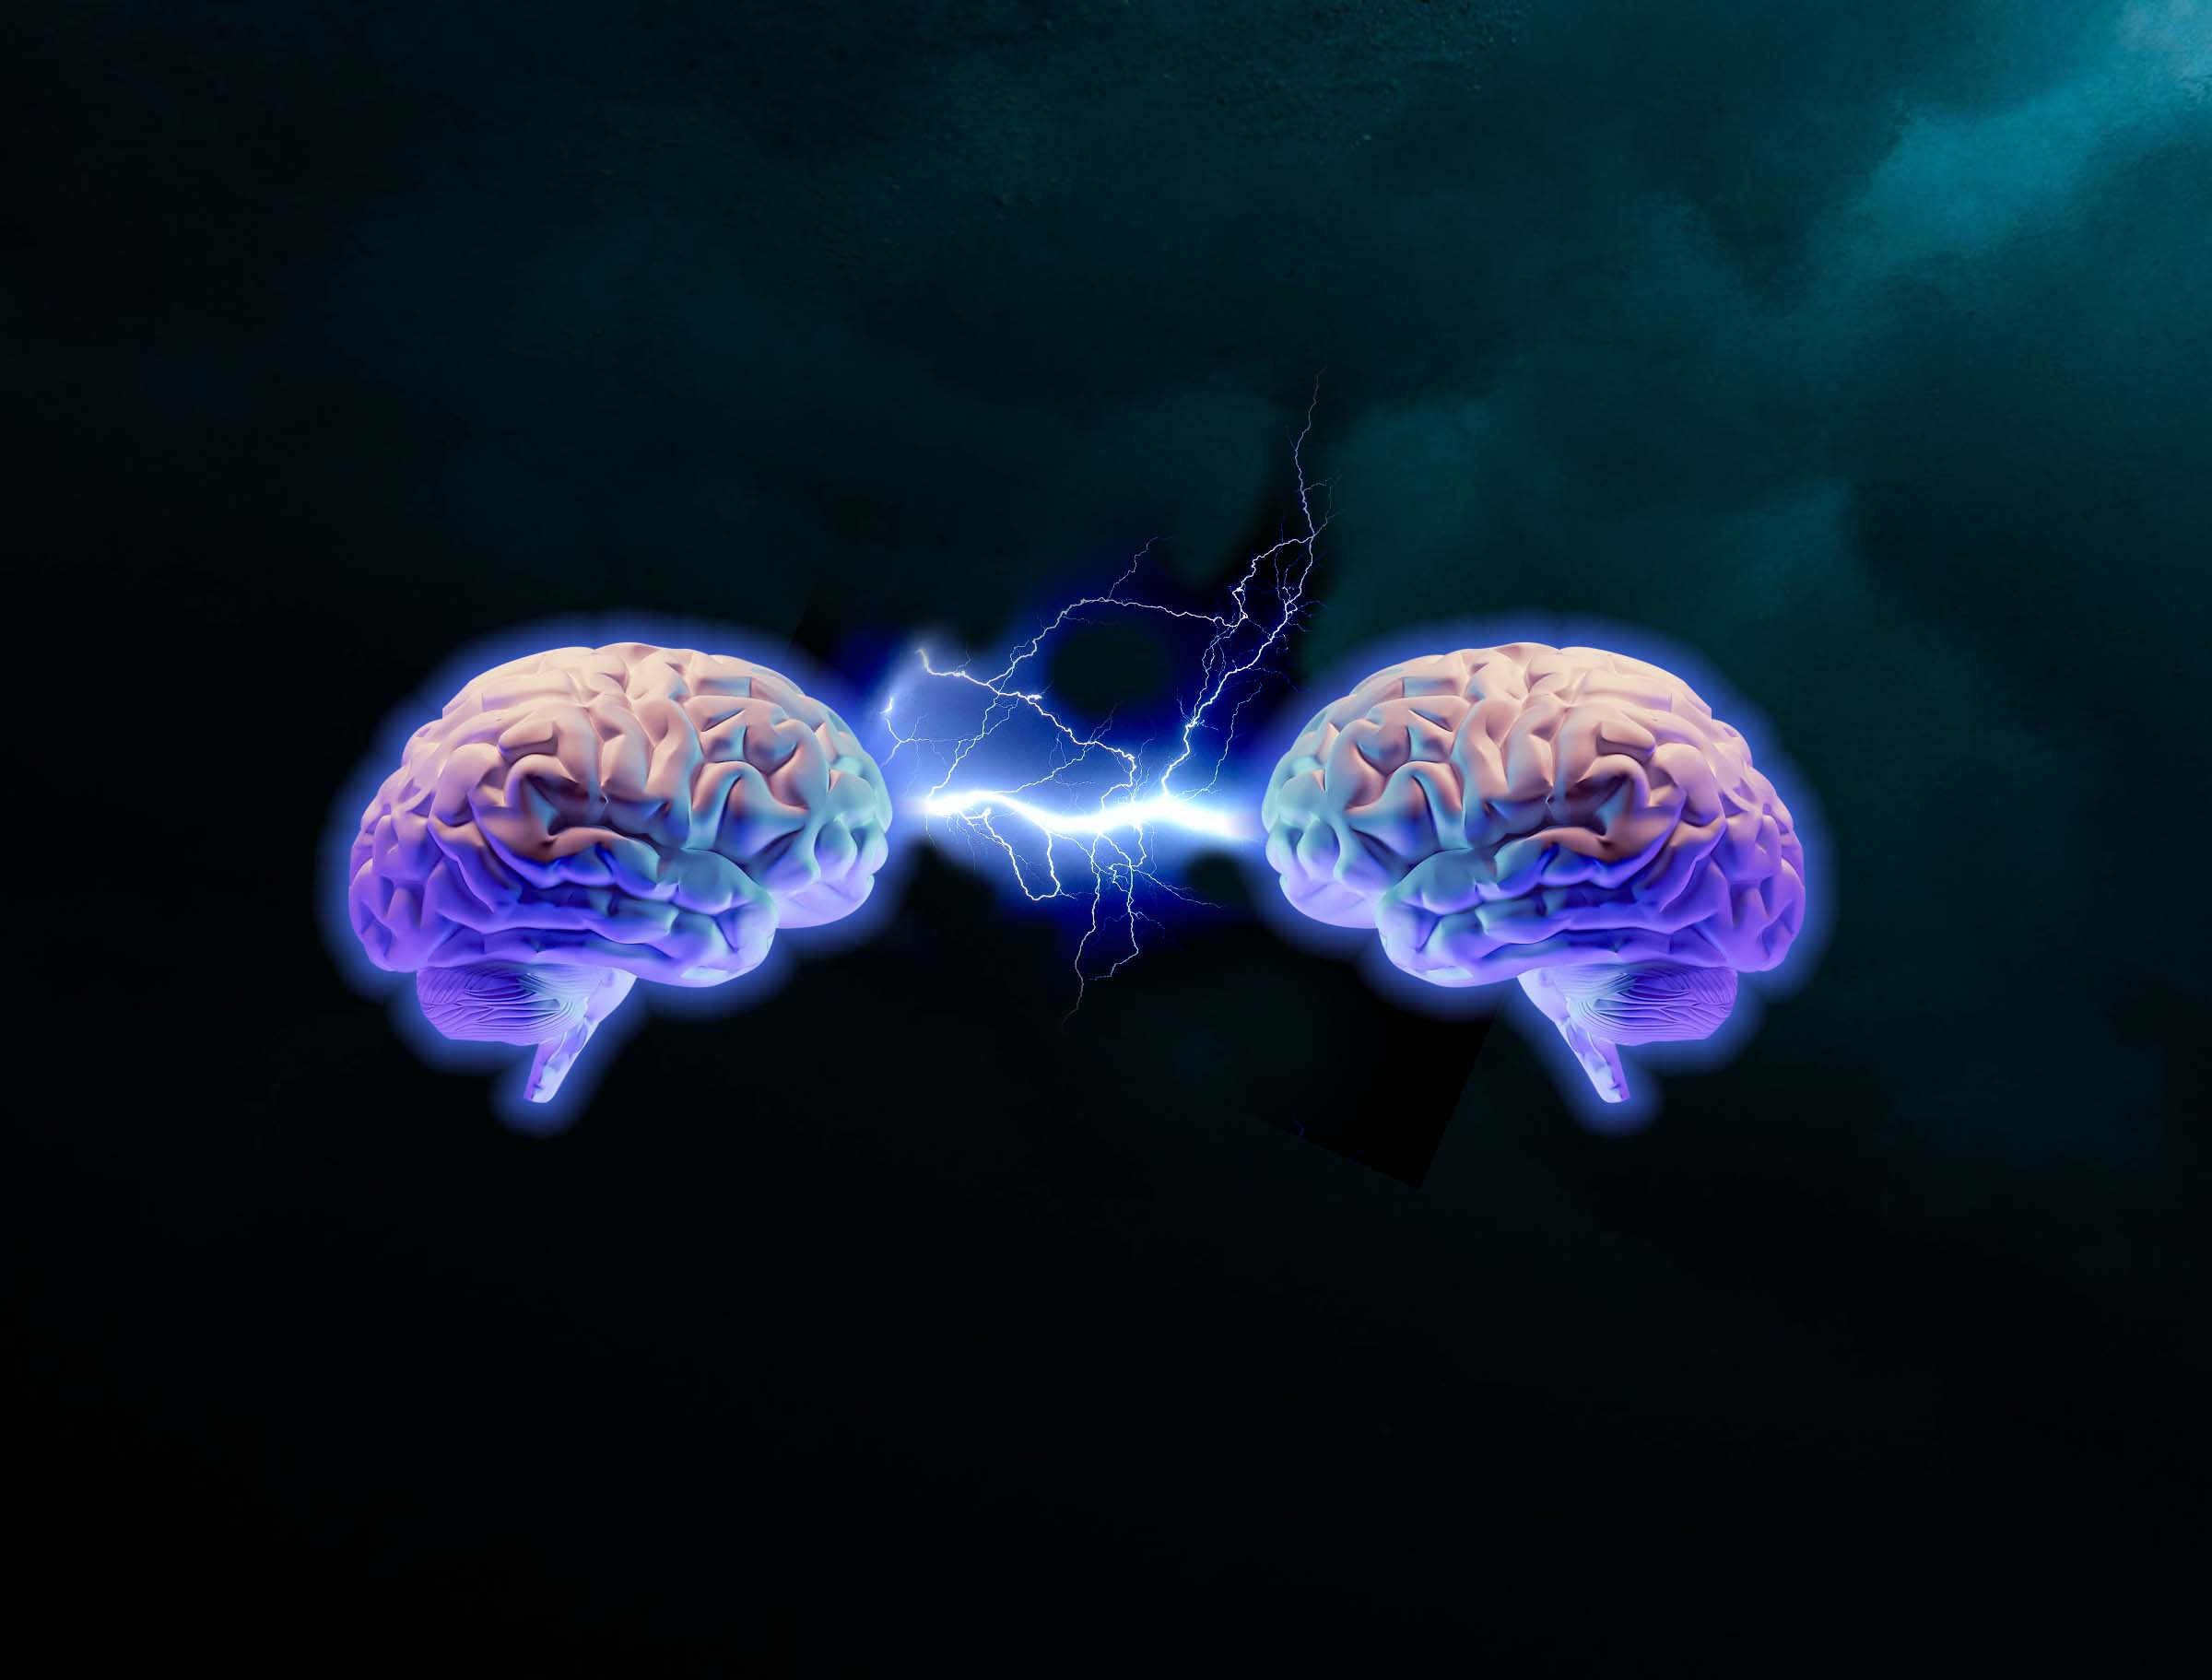 Two brains sparking off each other